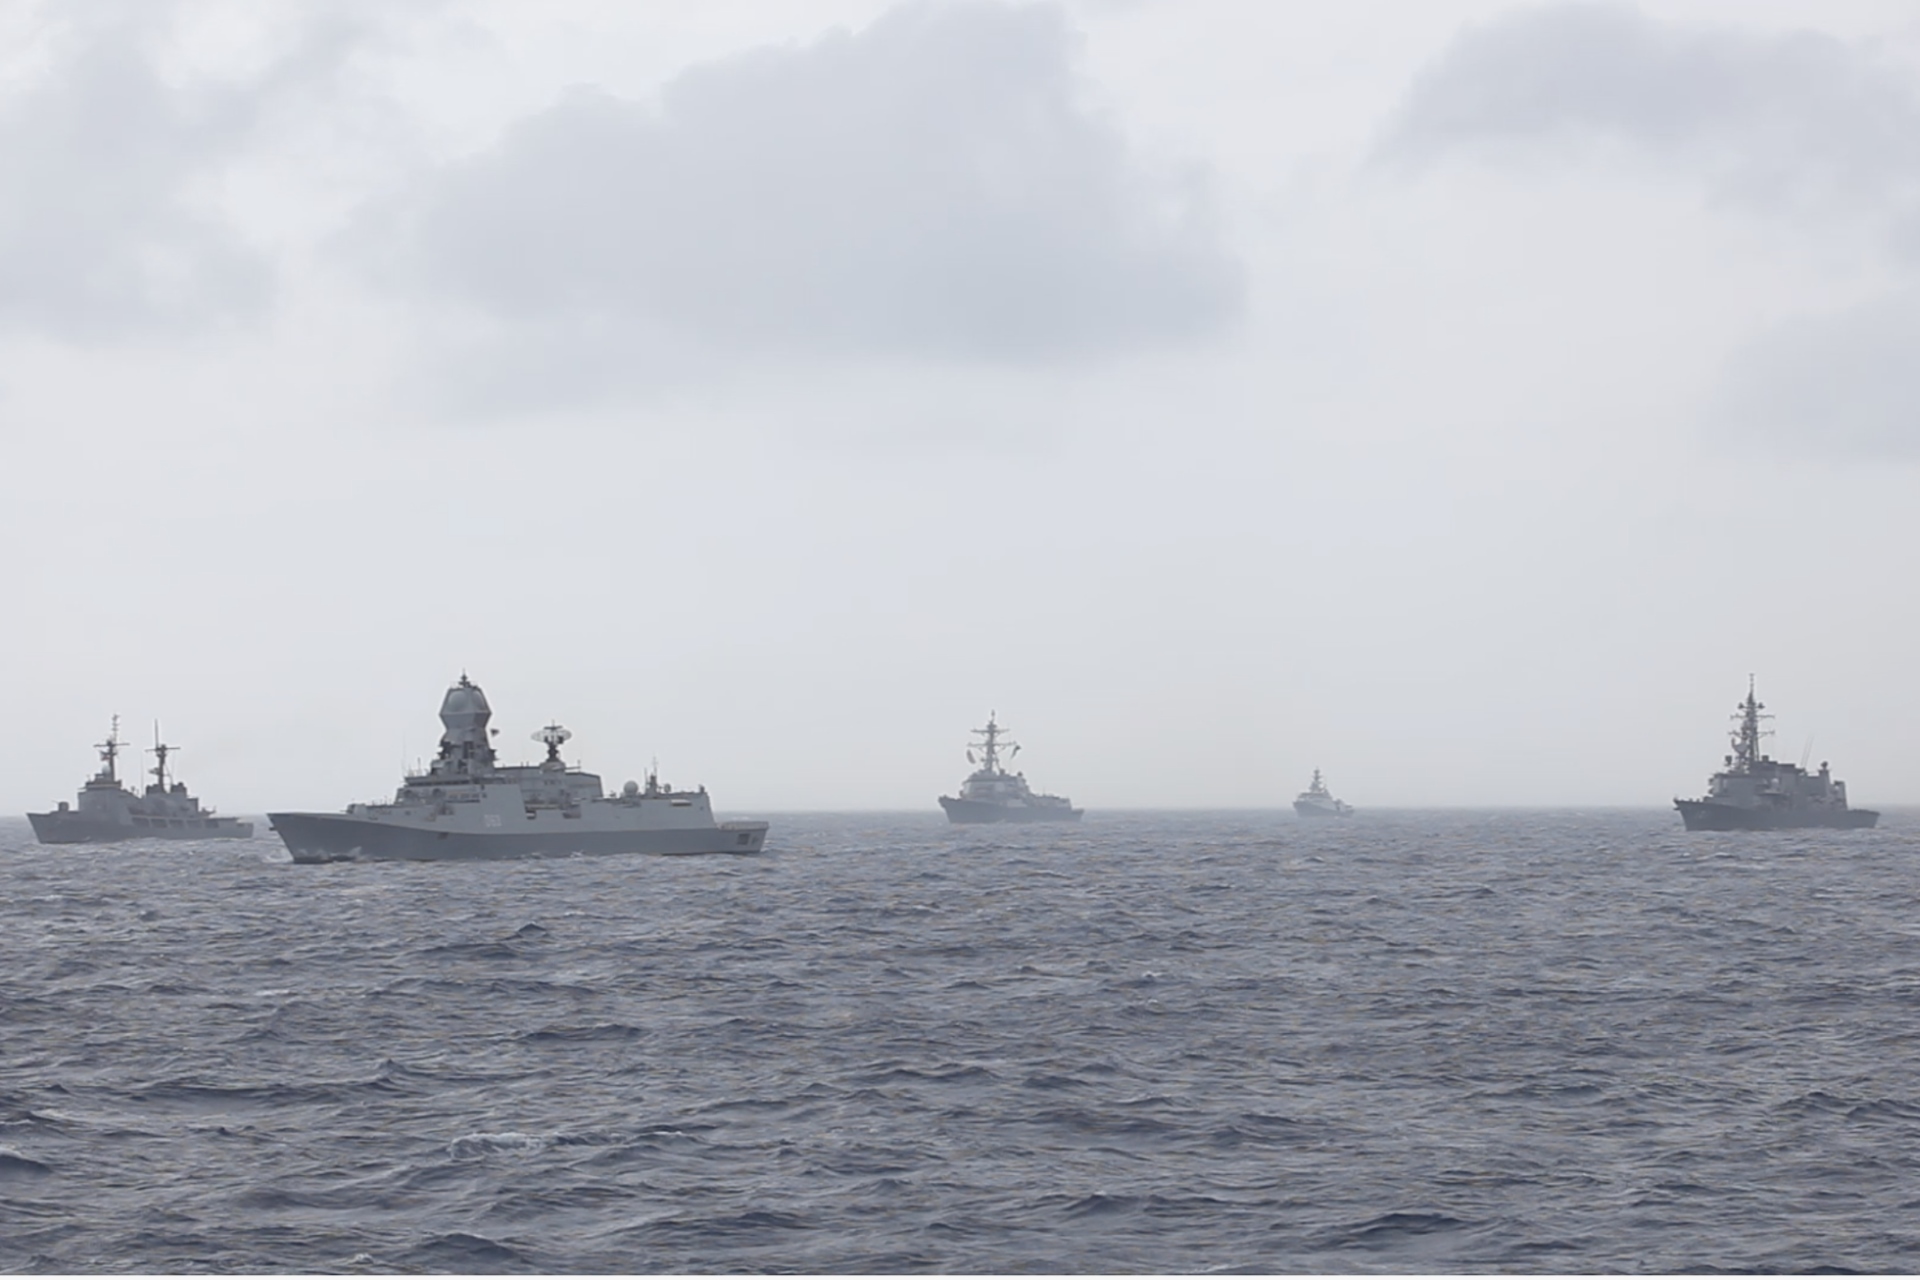 ADMM-Plus navies sailing in formation while en-route to Singapore.